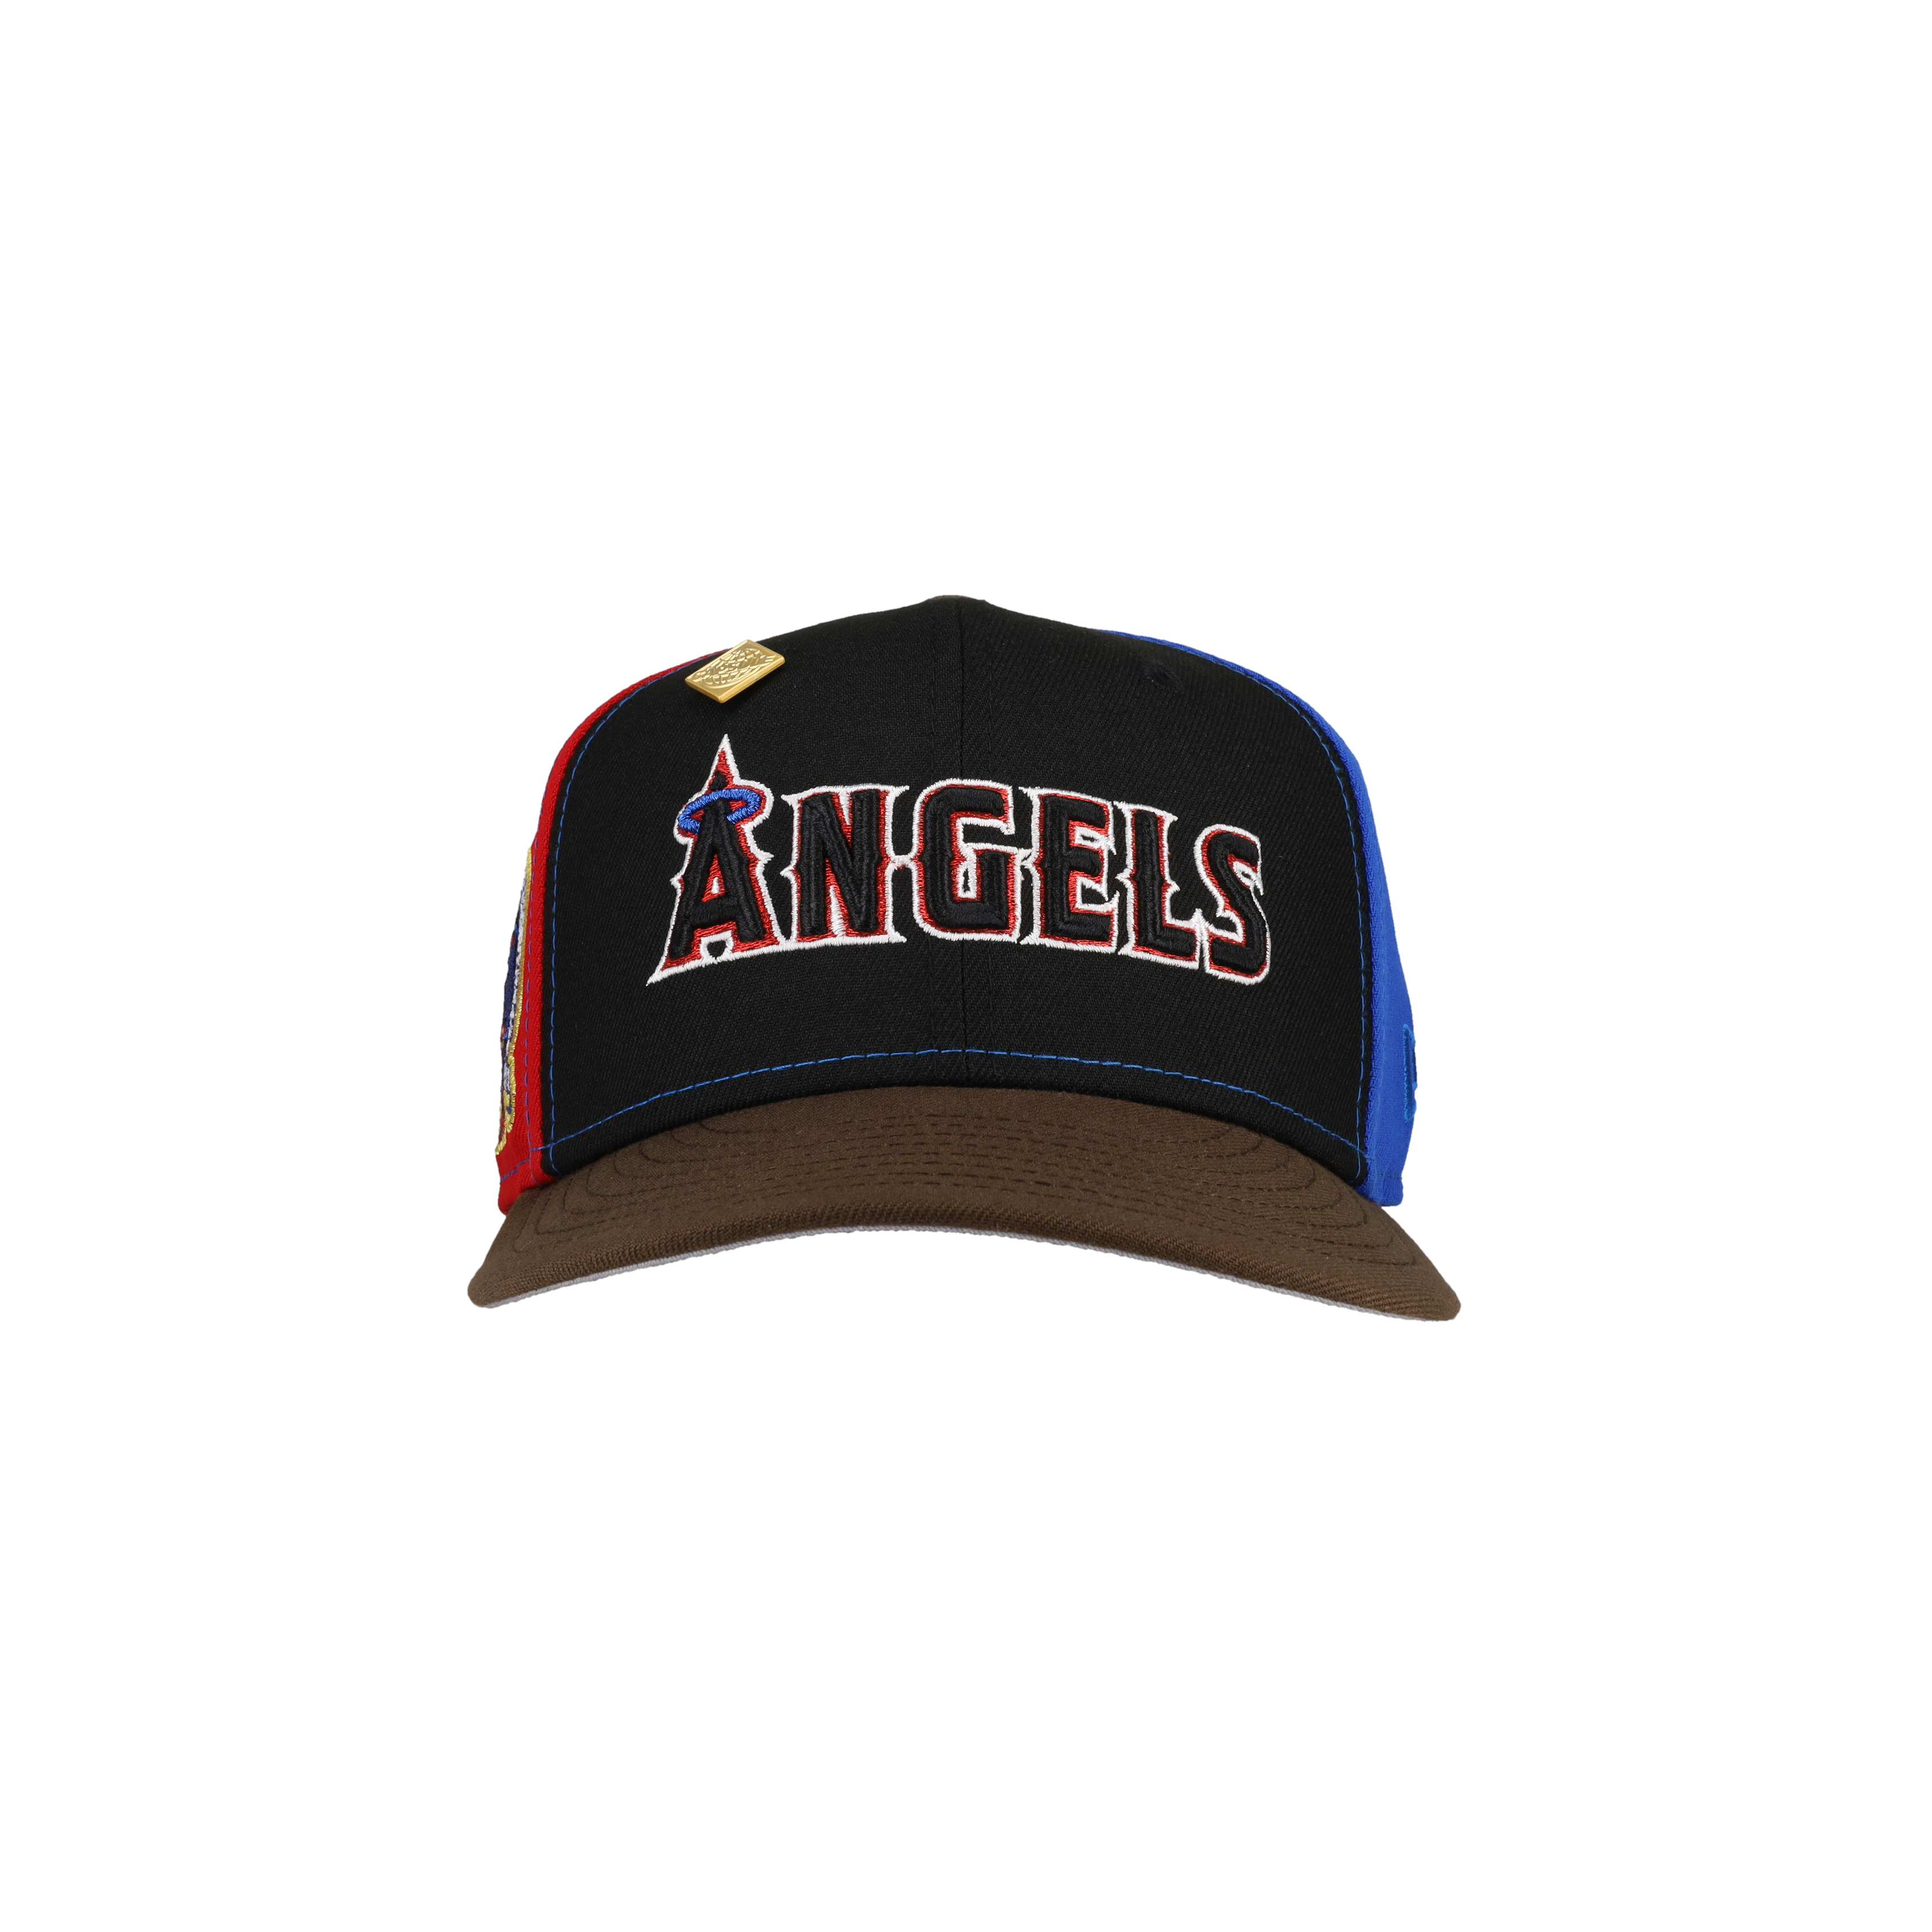 Anaheim Angels 50th Season Turbo Pinwheel 59fifty Fitted Hat